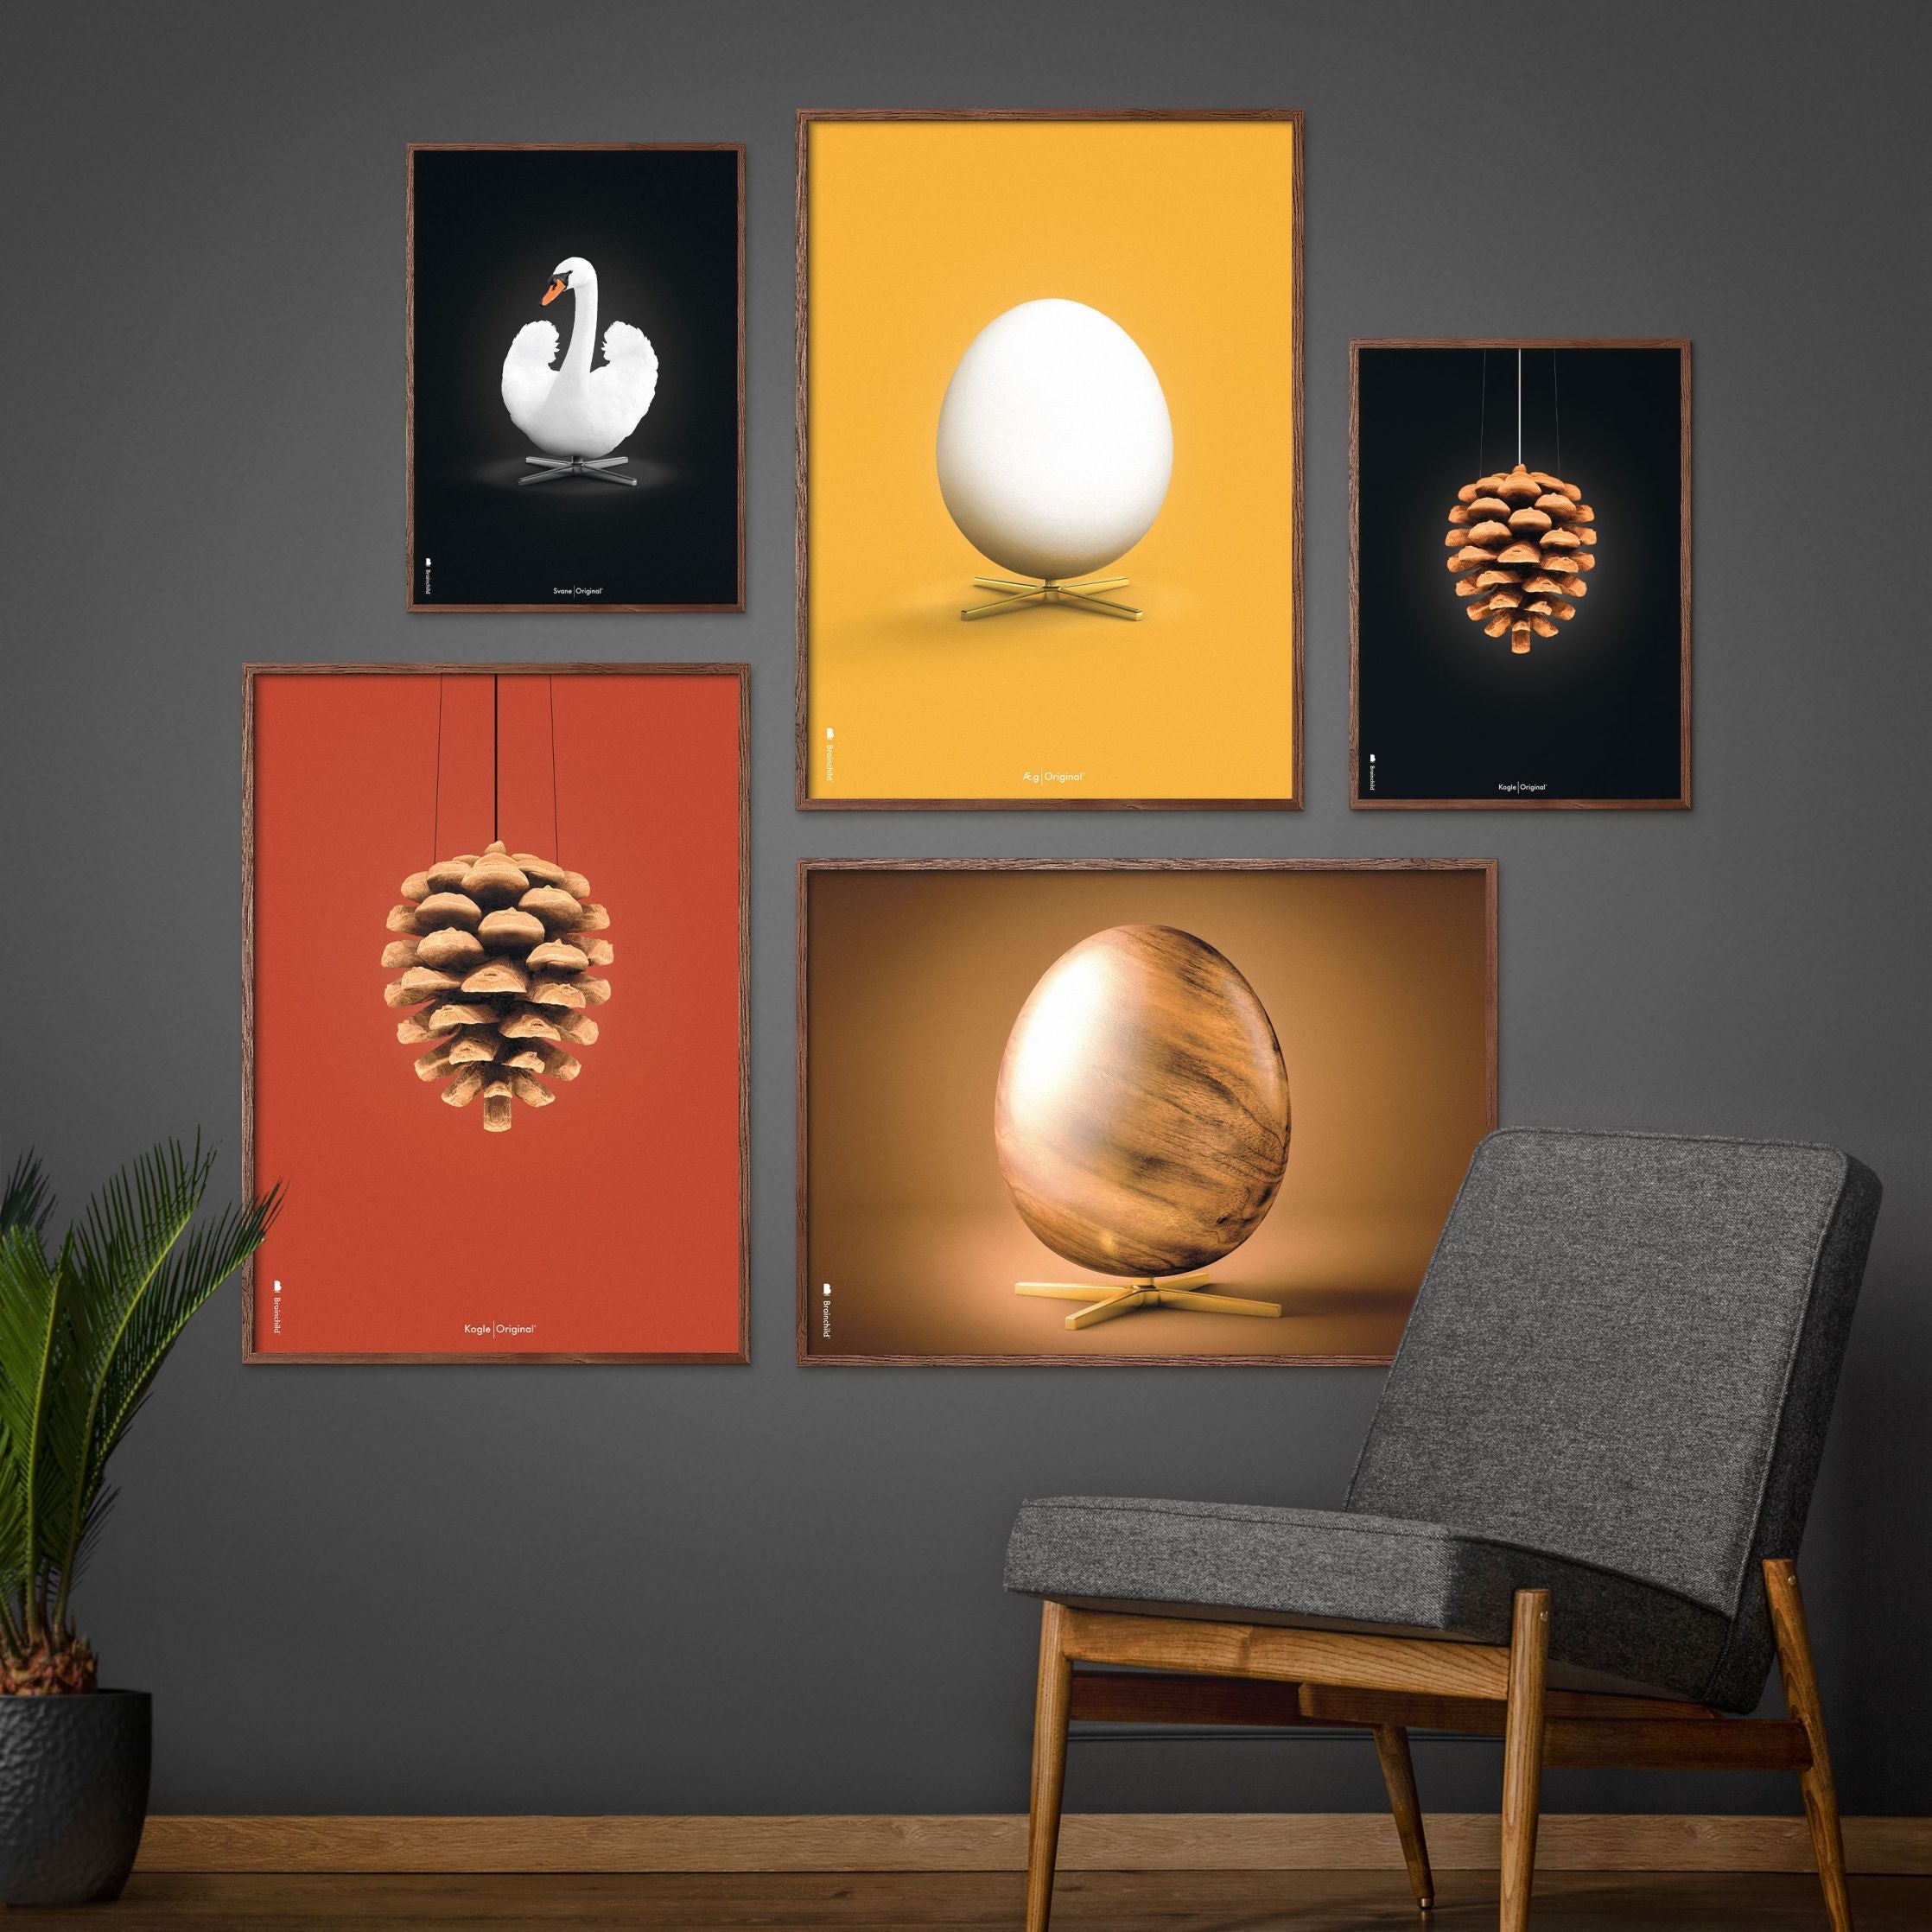 Brainchild Pine Cone Classic Poster, Frame In Black Lacquered Wood 30x40 Cm, Red Background